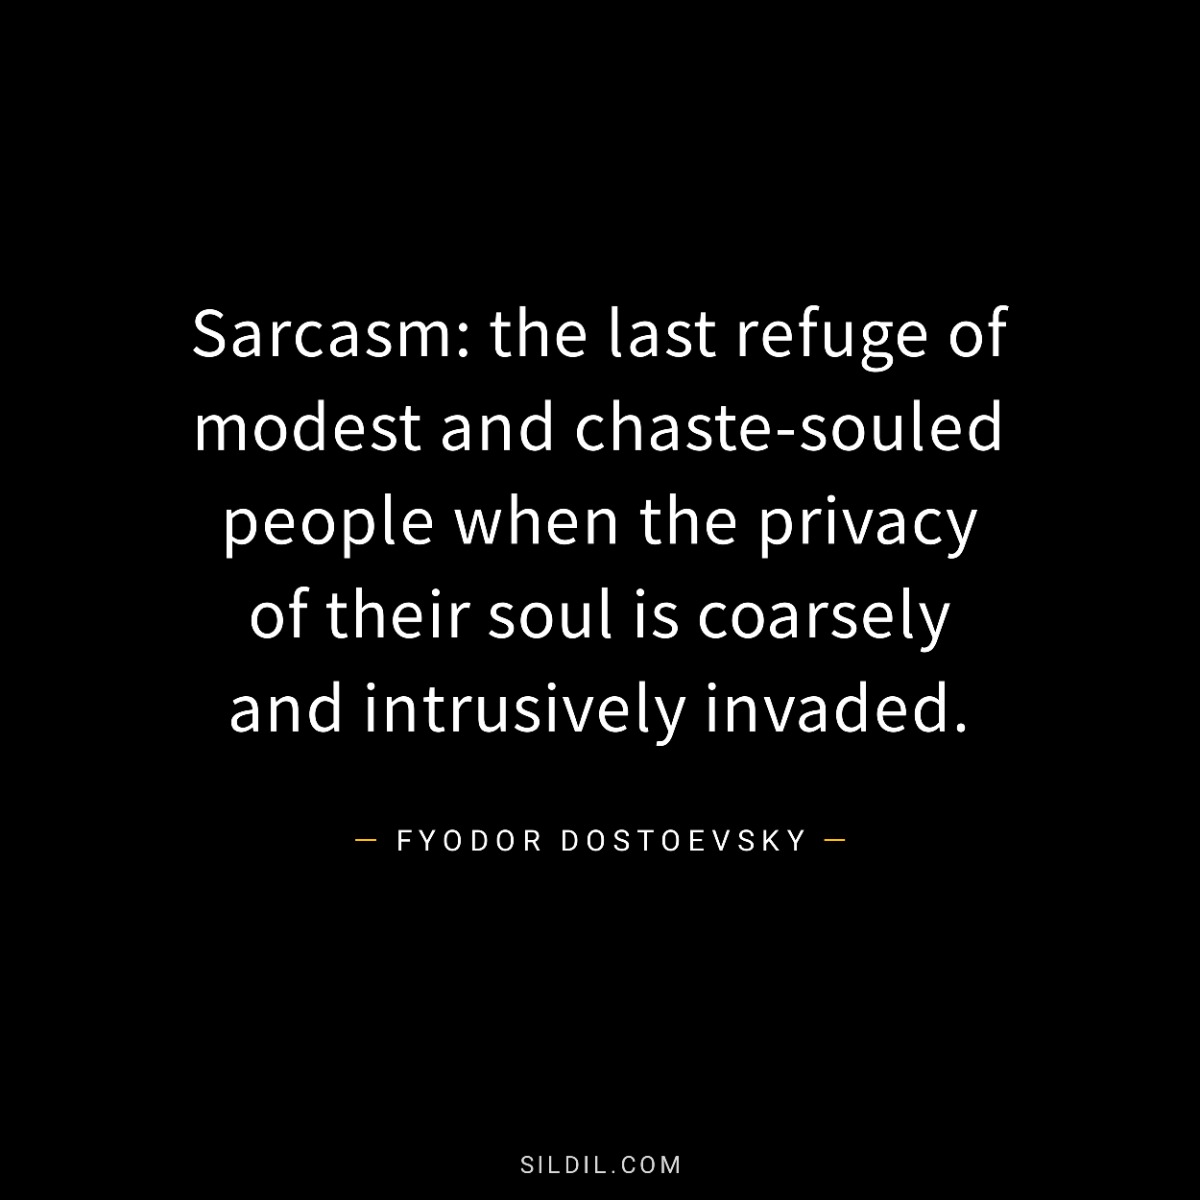 Sarcasm: the last refuge of modest and chaste-souled people when the privacy of their soul is coarsely and intrusively invaded.